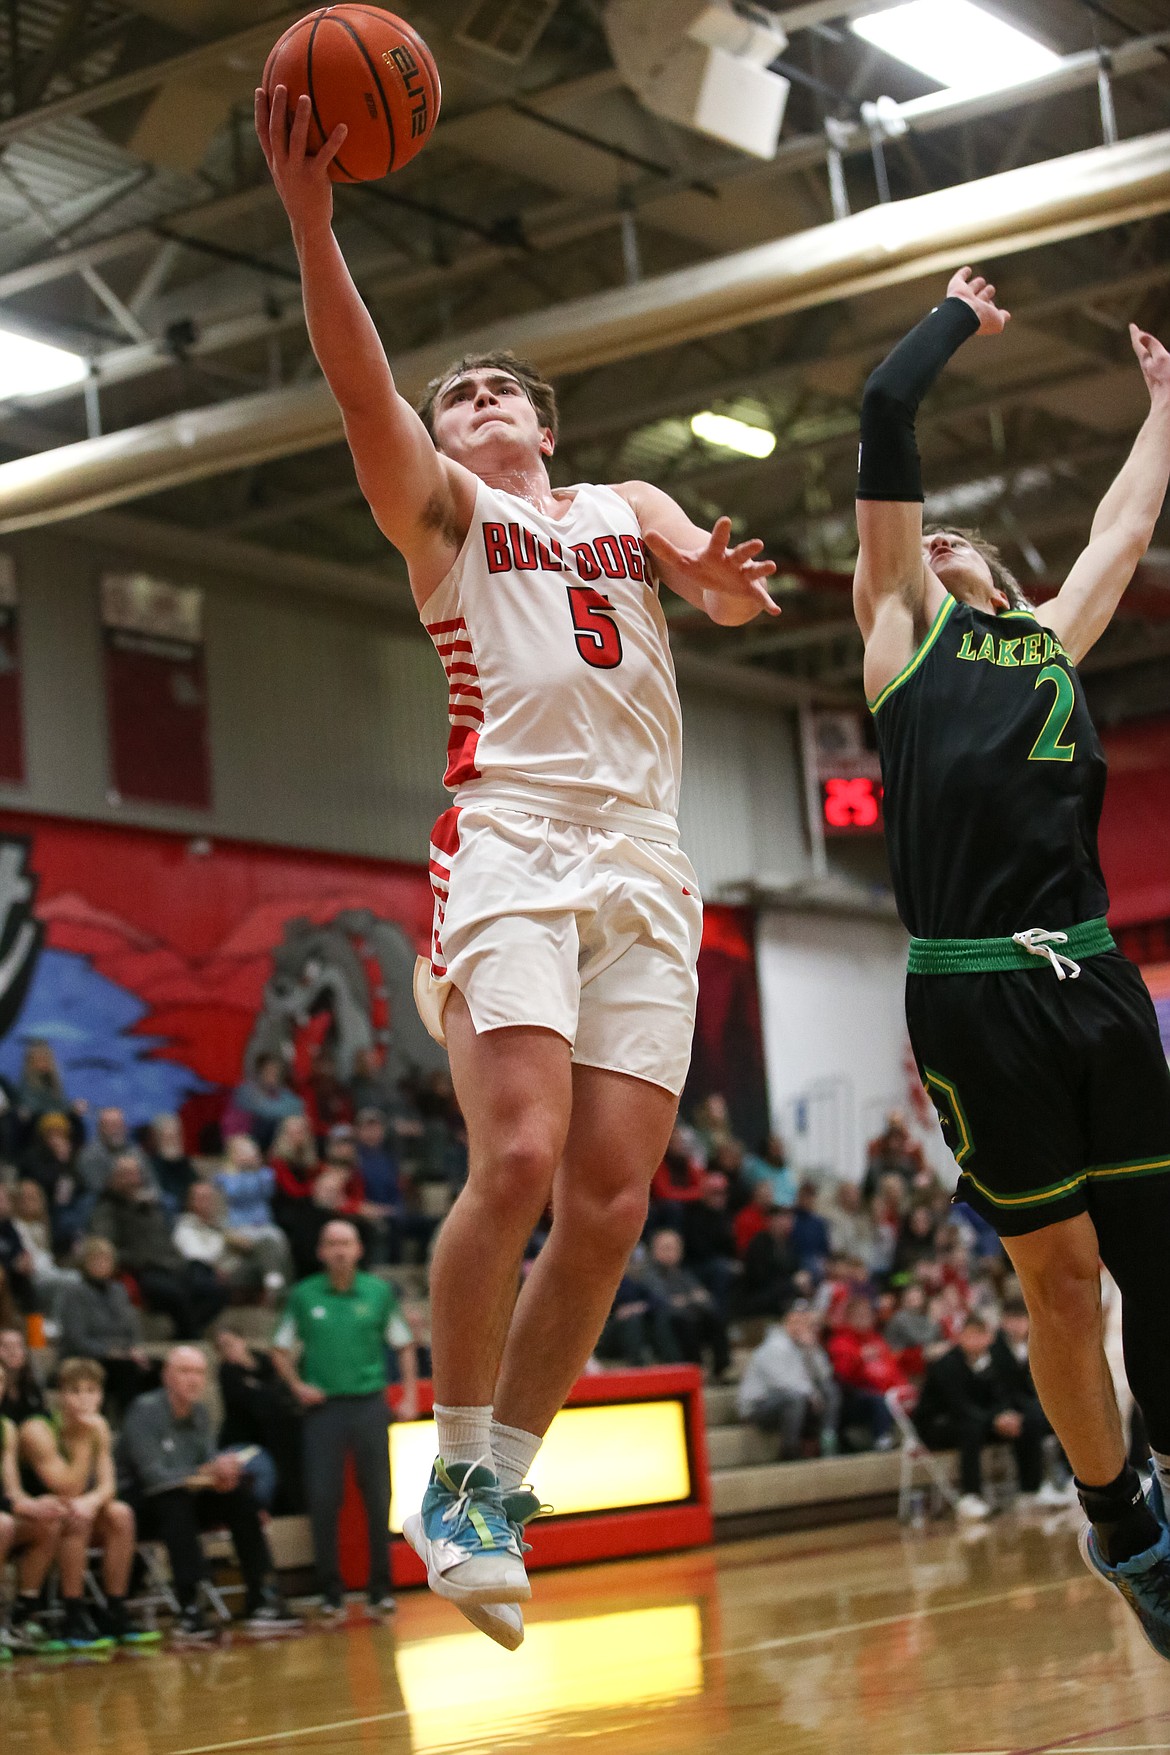 JASON DUCHOW PHOTOGRAPHY
Sandpoint junior guard Max Frank goes up for a shot while Lakeland senior Nick Nowell defends during Game 1 of the 4A Region 1 best-of-3 championship series on Wednesday at Les Rogers Court.